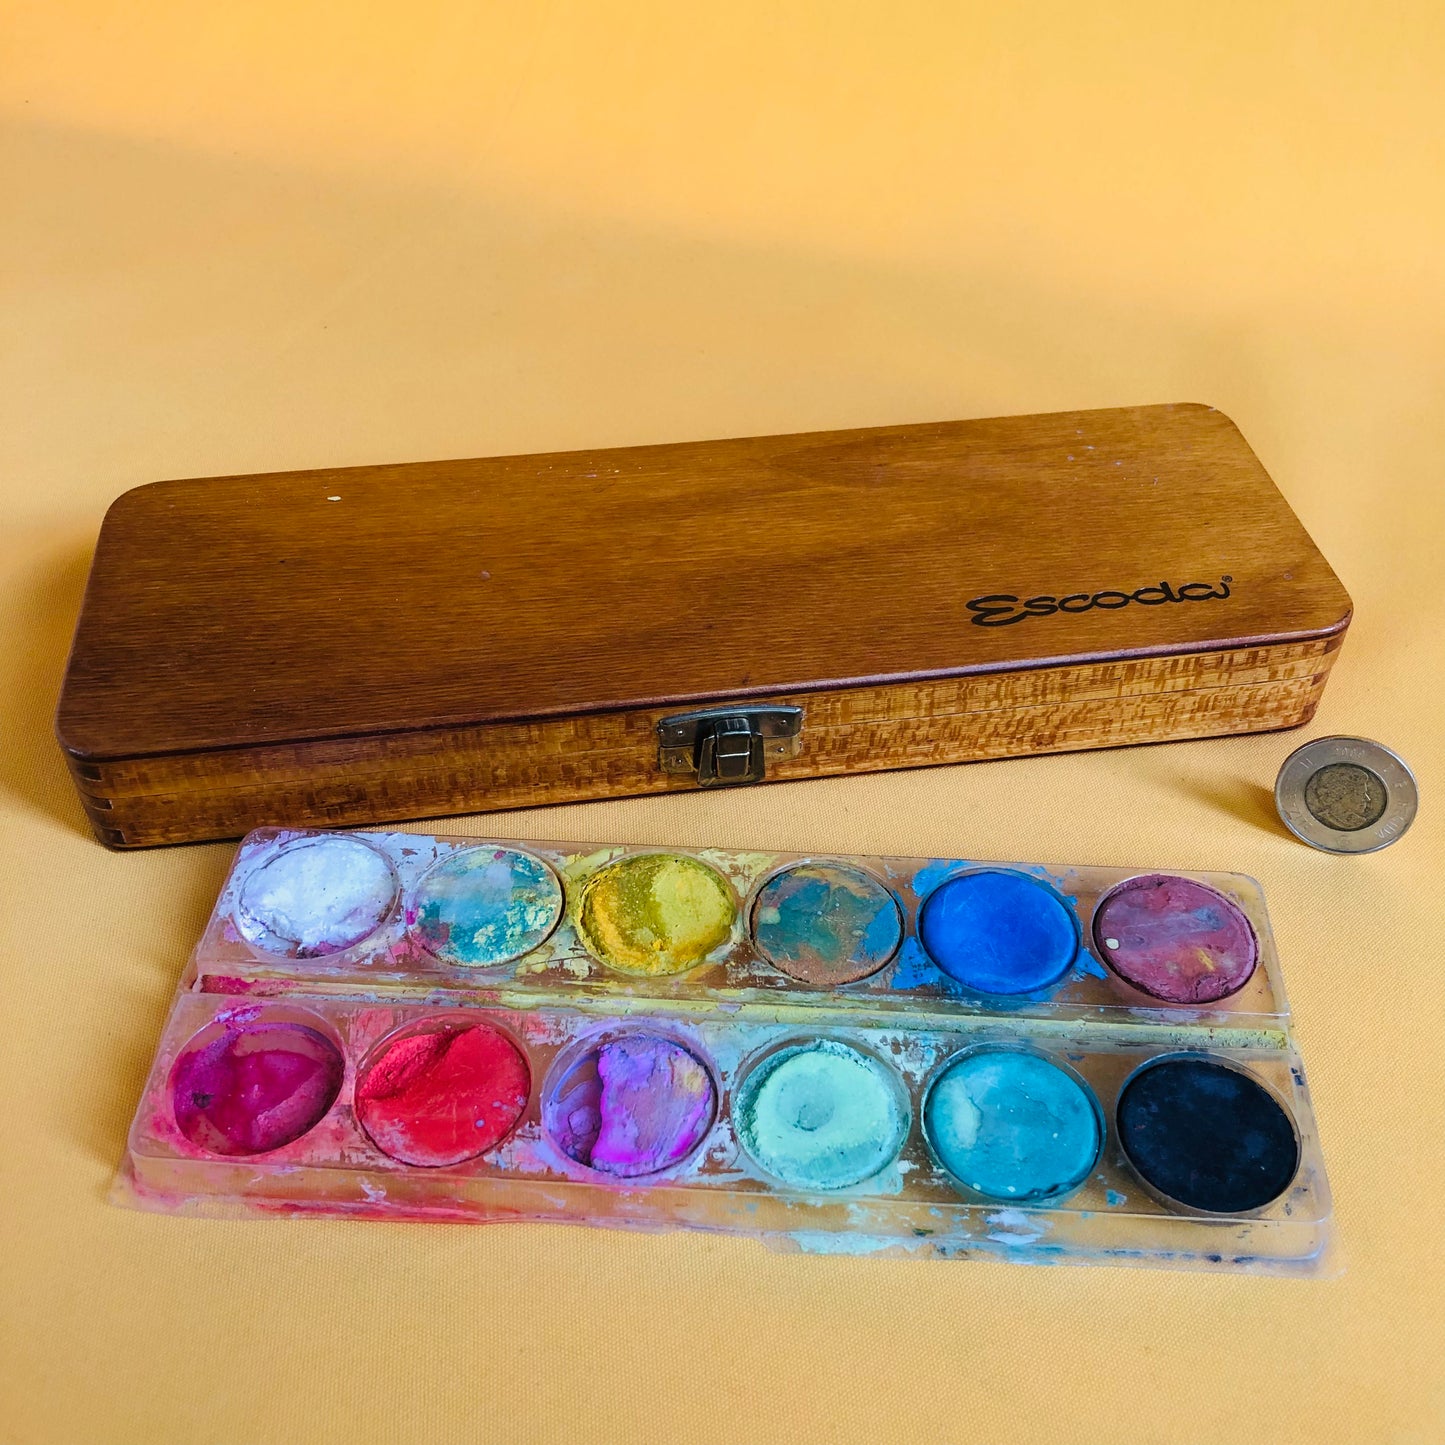 escoda set of watercolor brushes in wooden box